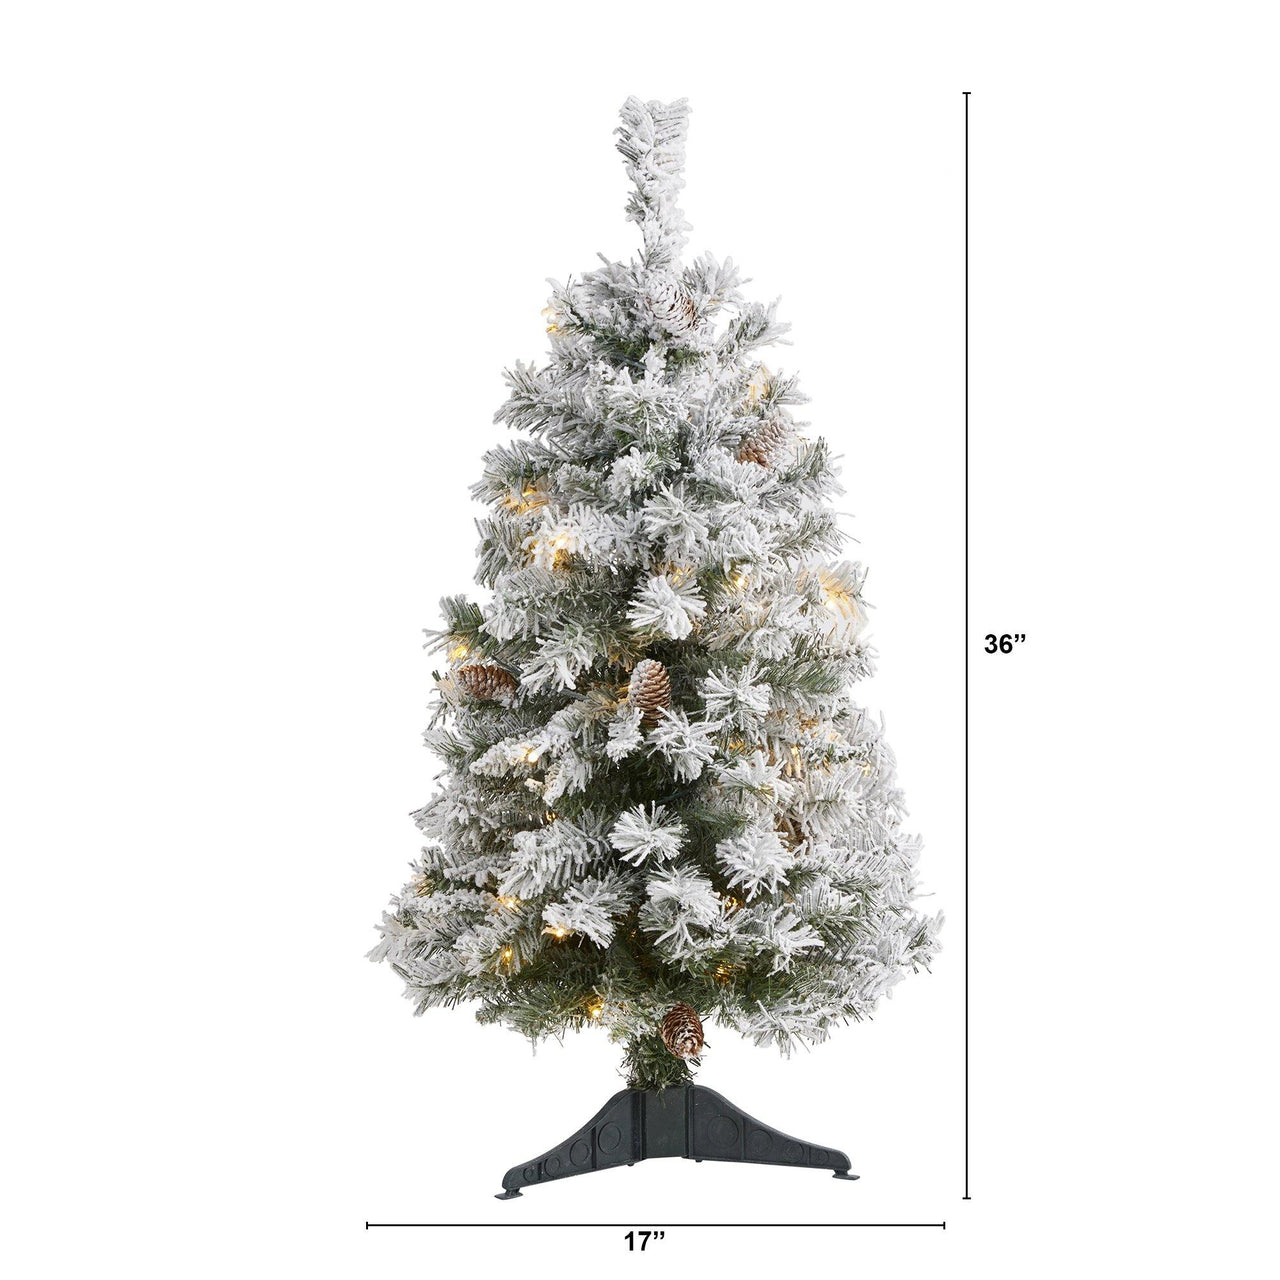 3' Flocked White River Mountain Pine Artificial Christmas Tree with Pinecones and 50 Clear LED Lights - The Fox Decor